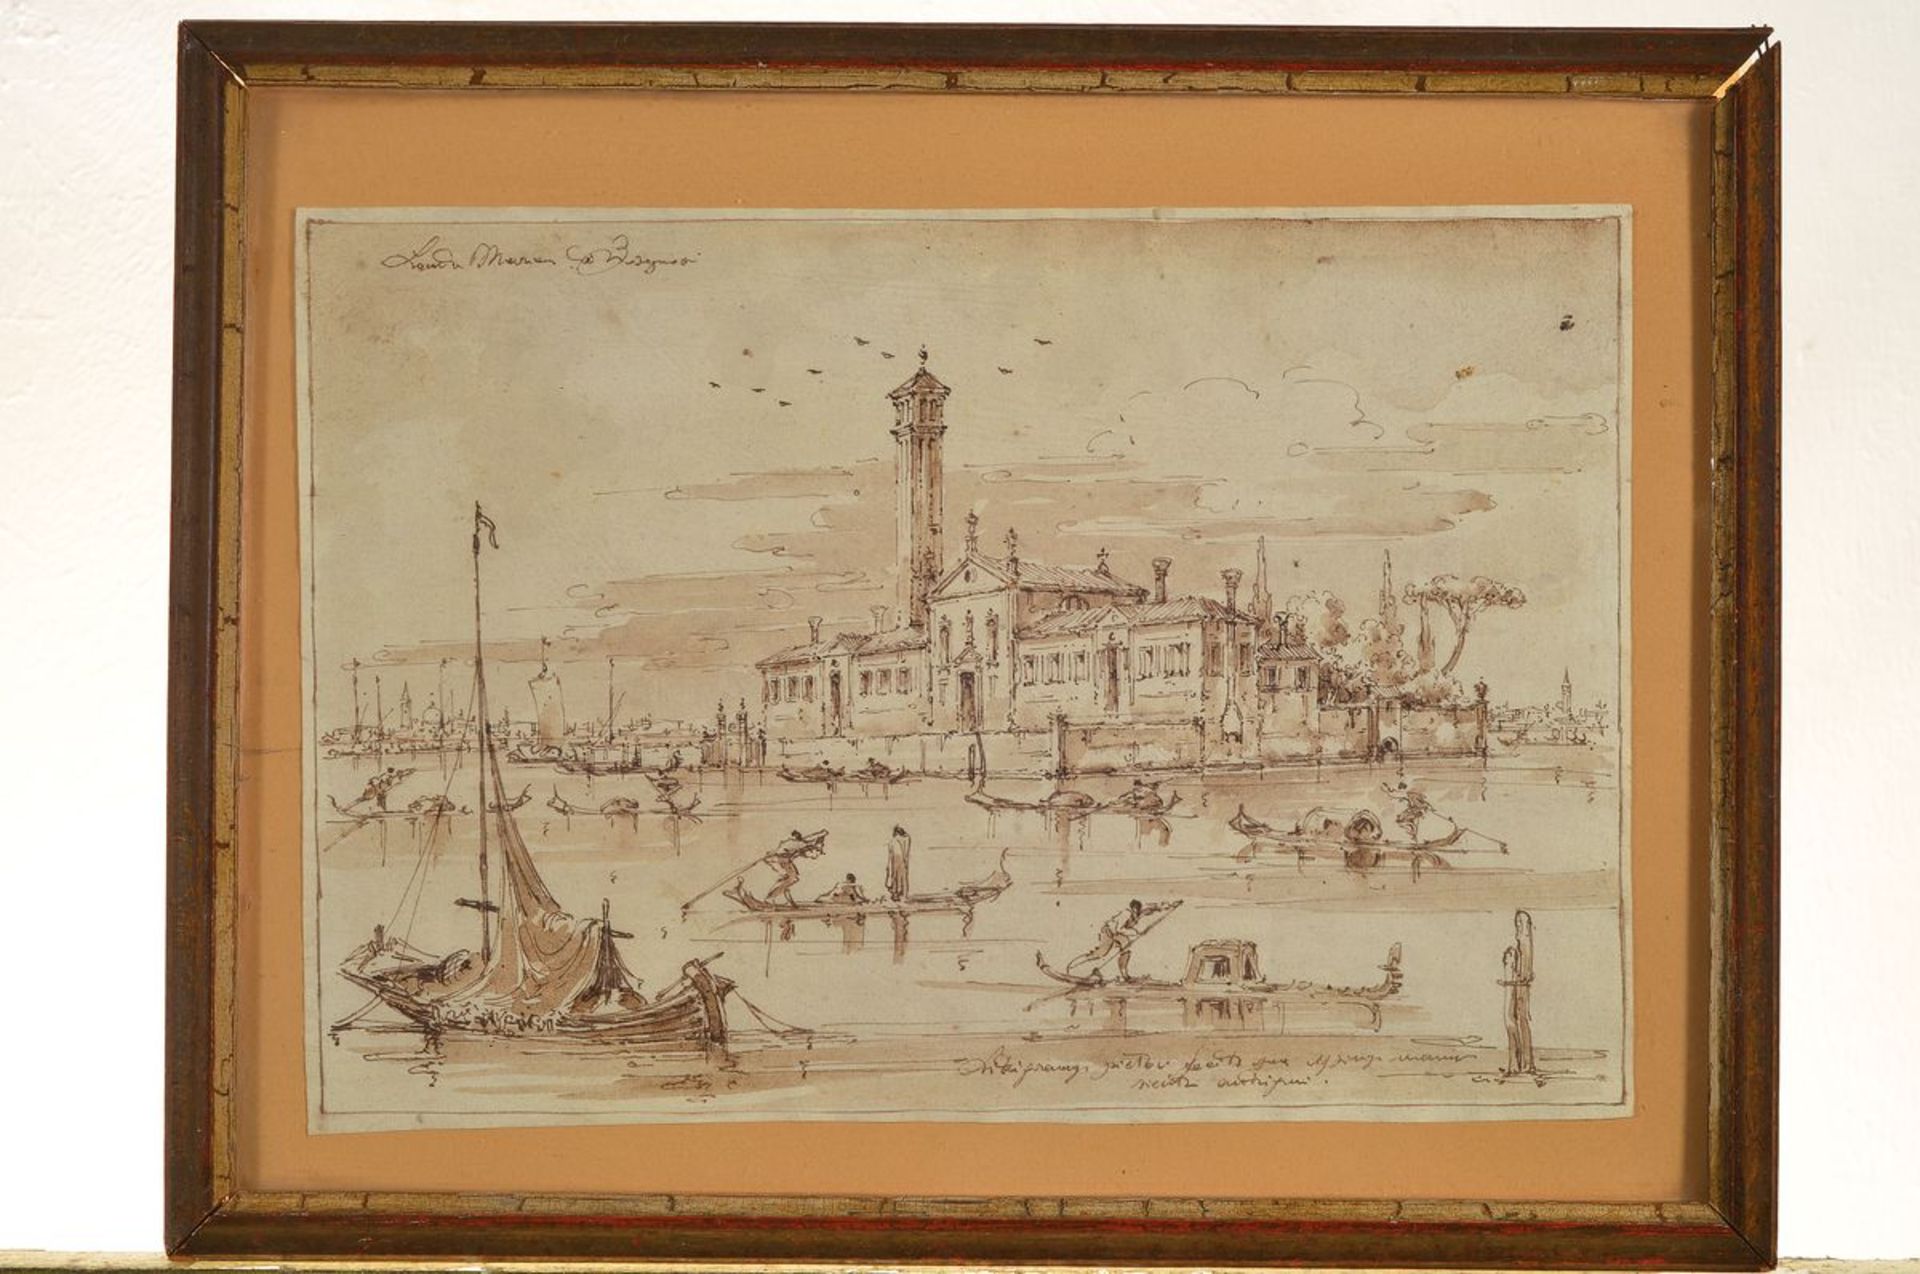 3 wash pen and ink drawings, 18th C., two views from Venice approx. 18x28cm and 20x29cm,farmstead on - Image 4 of 6